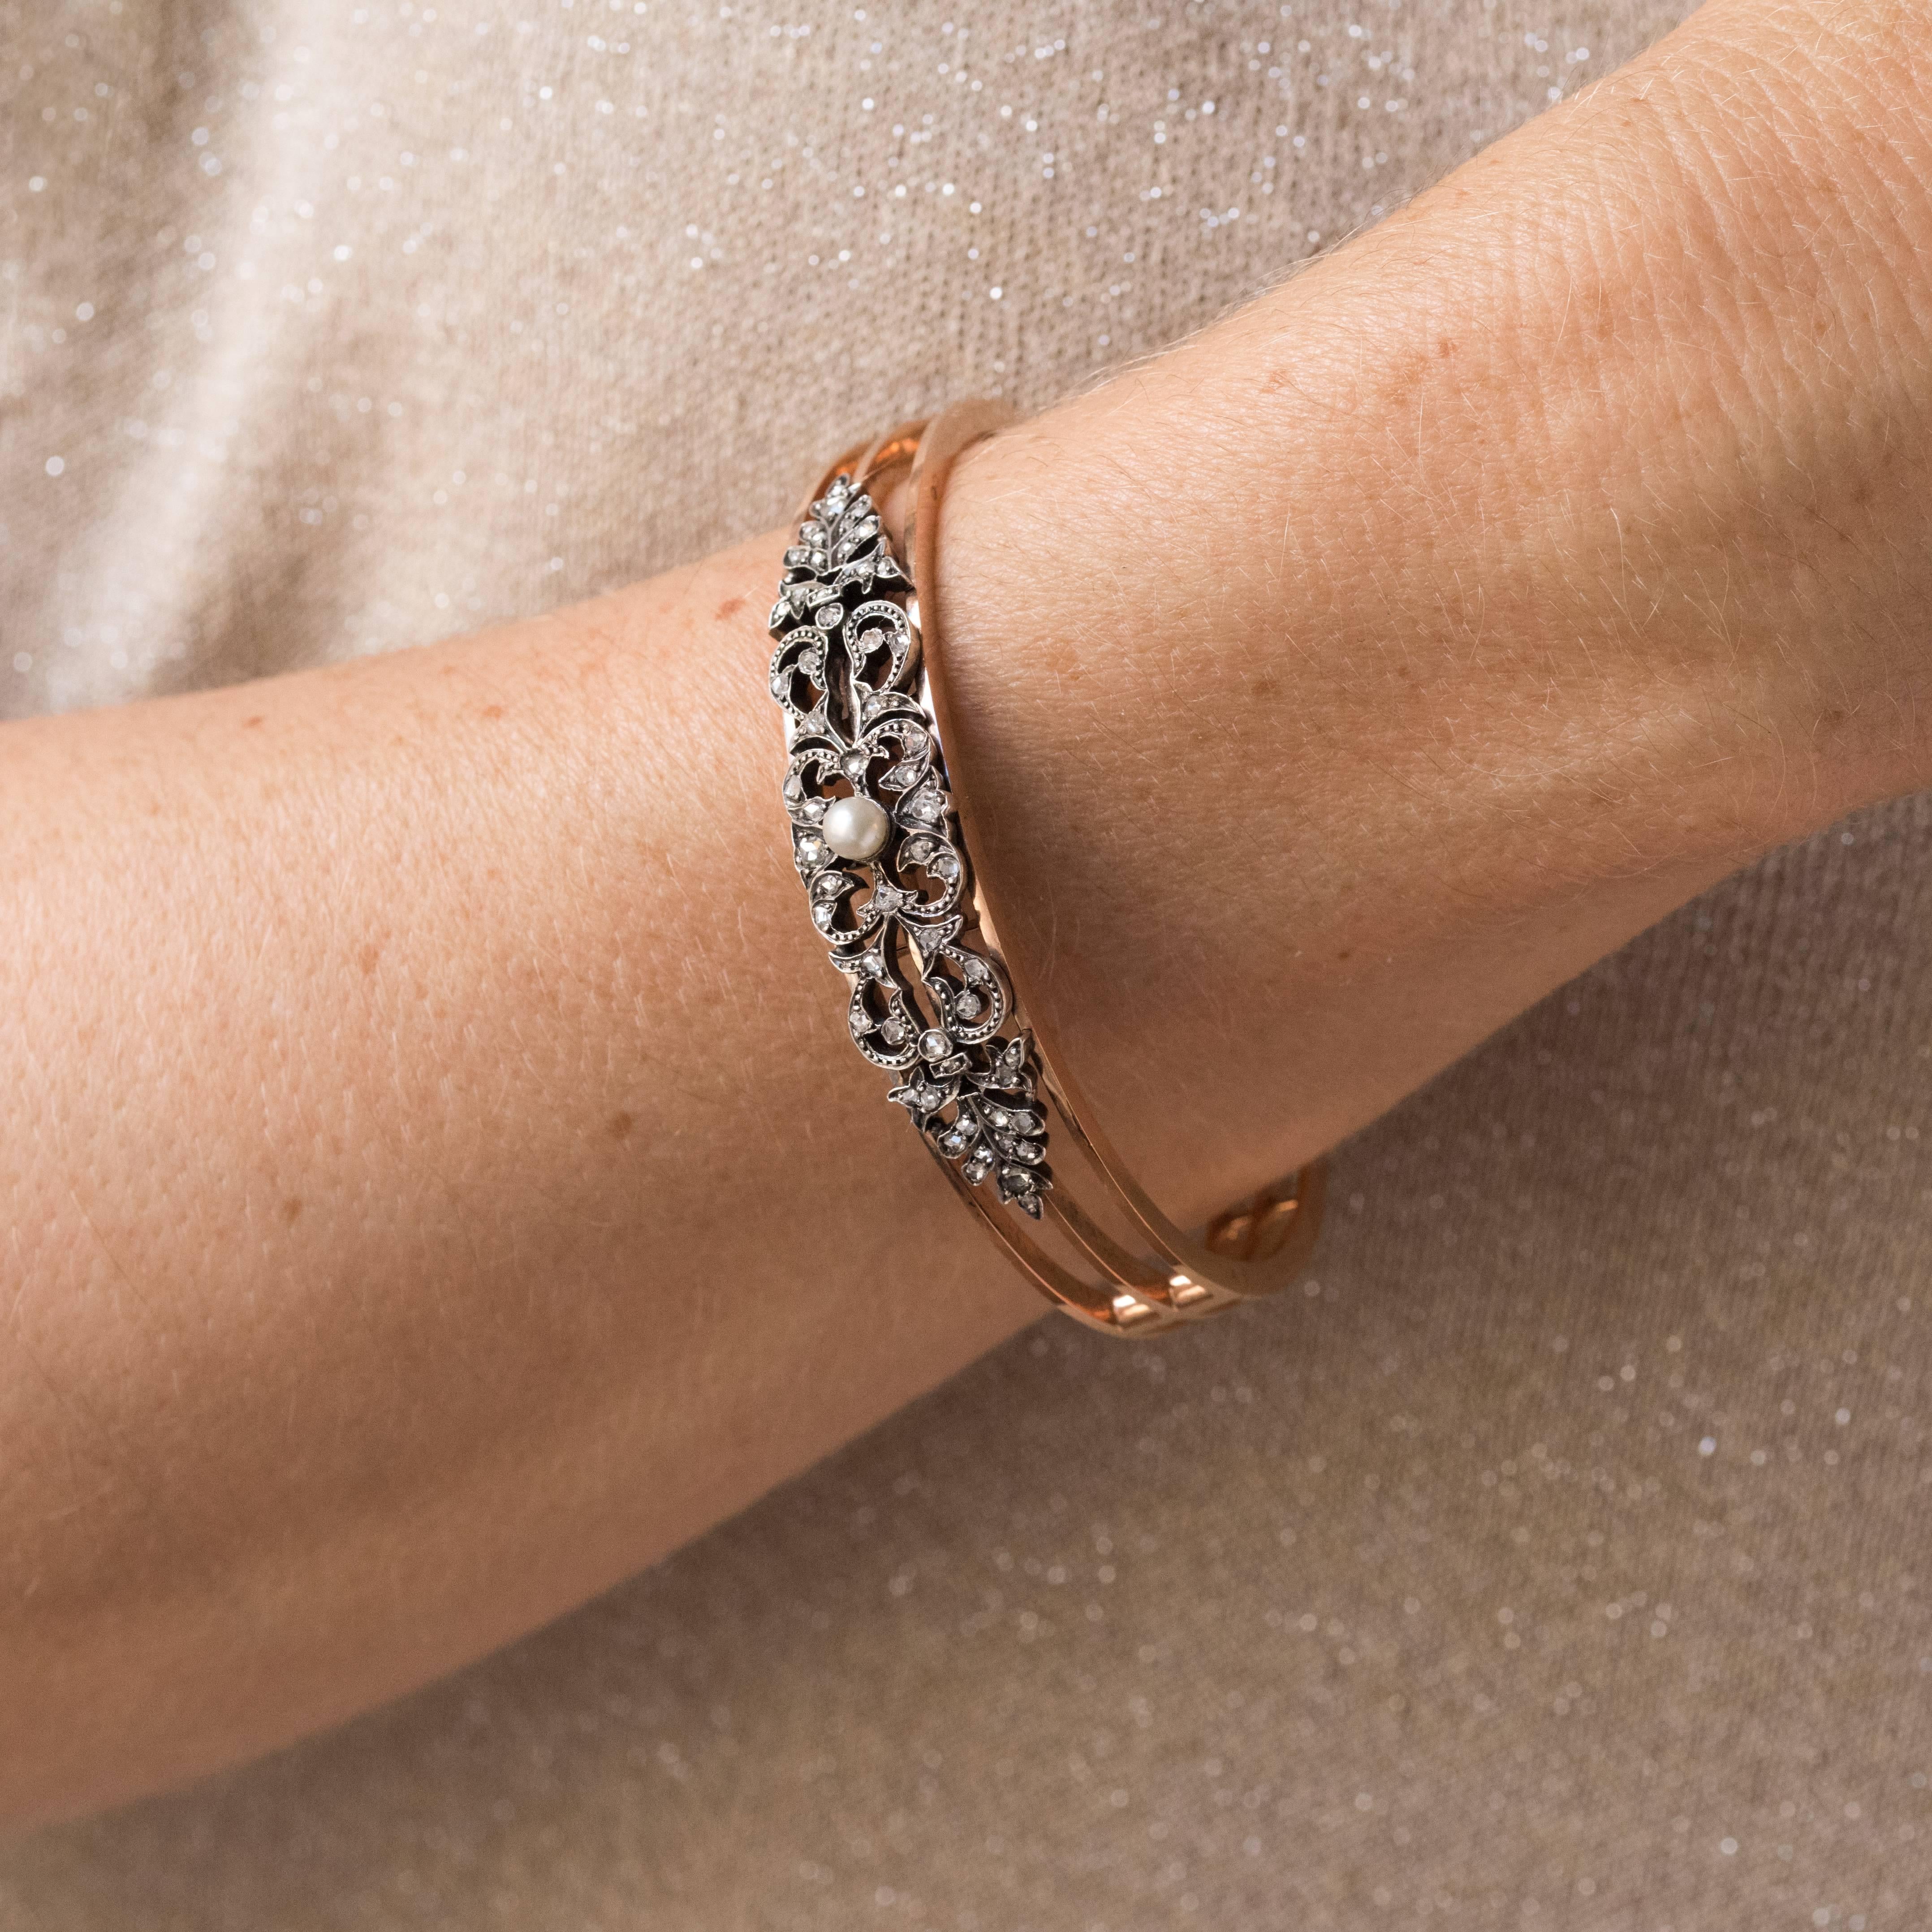 Bracelet in 18K rose gold and silver, owl hallmark.
A hinged bracelet consisting of three separate but connected gold bands. Decorated at the top with an openwork floral design incorporating rose cut diamonds and a fine pearl at the centre. The